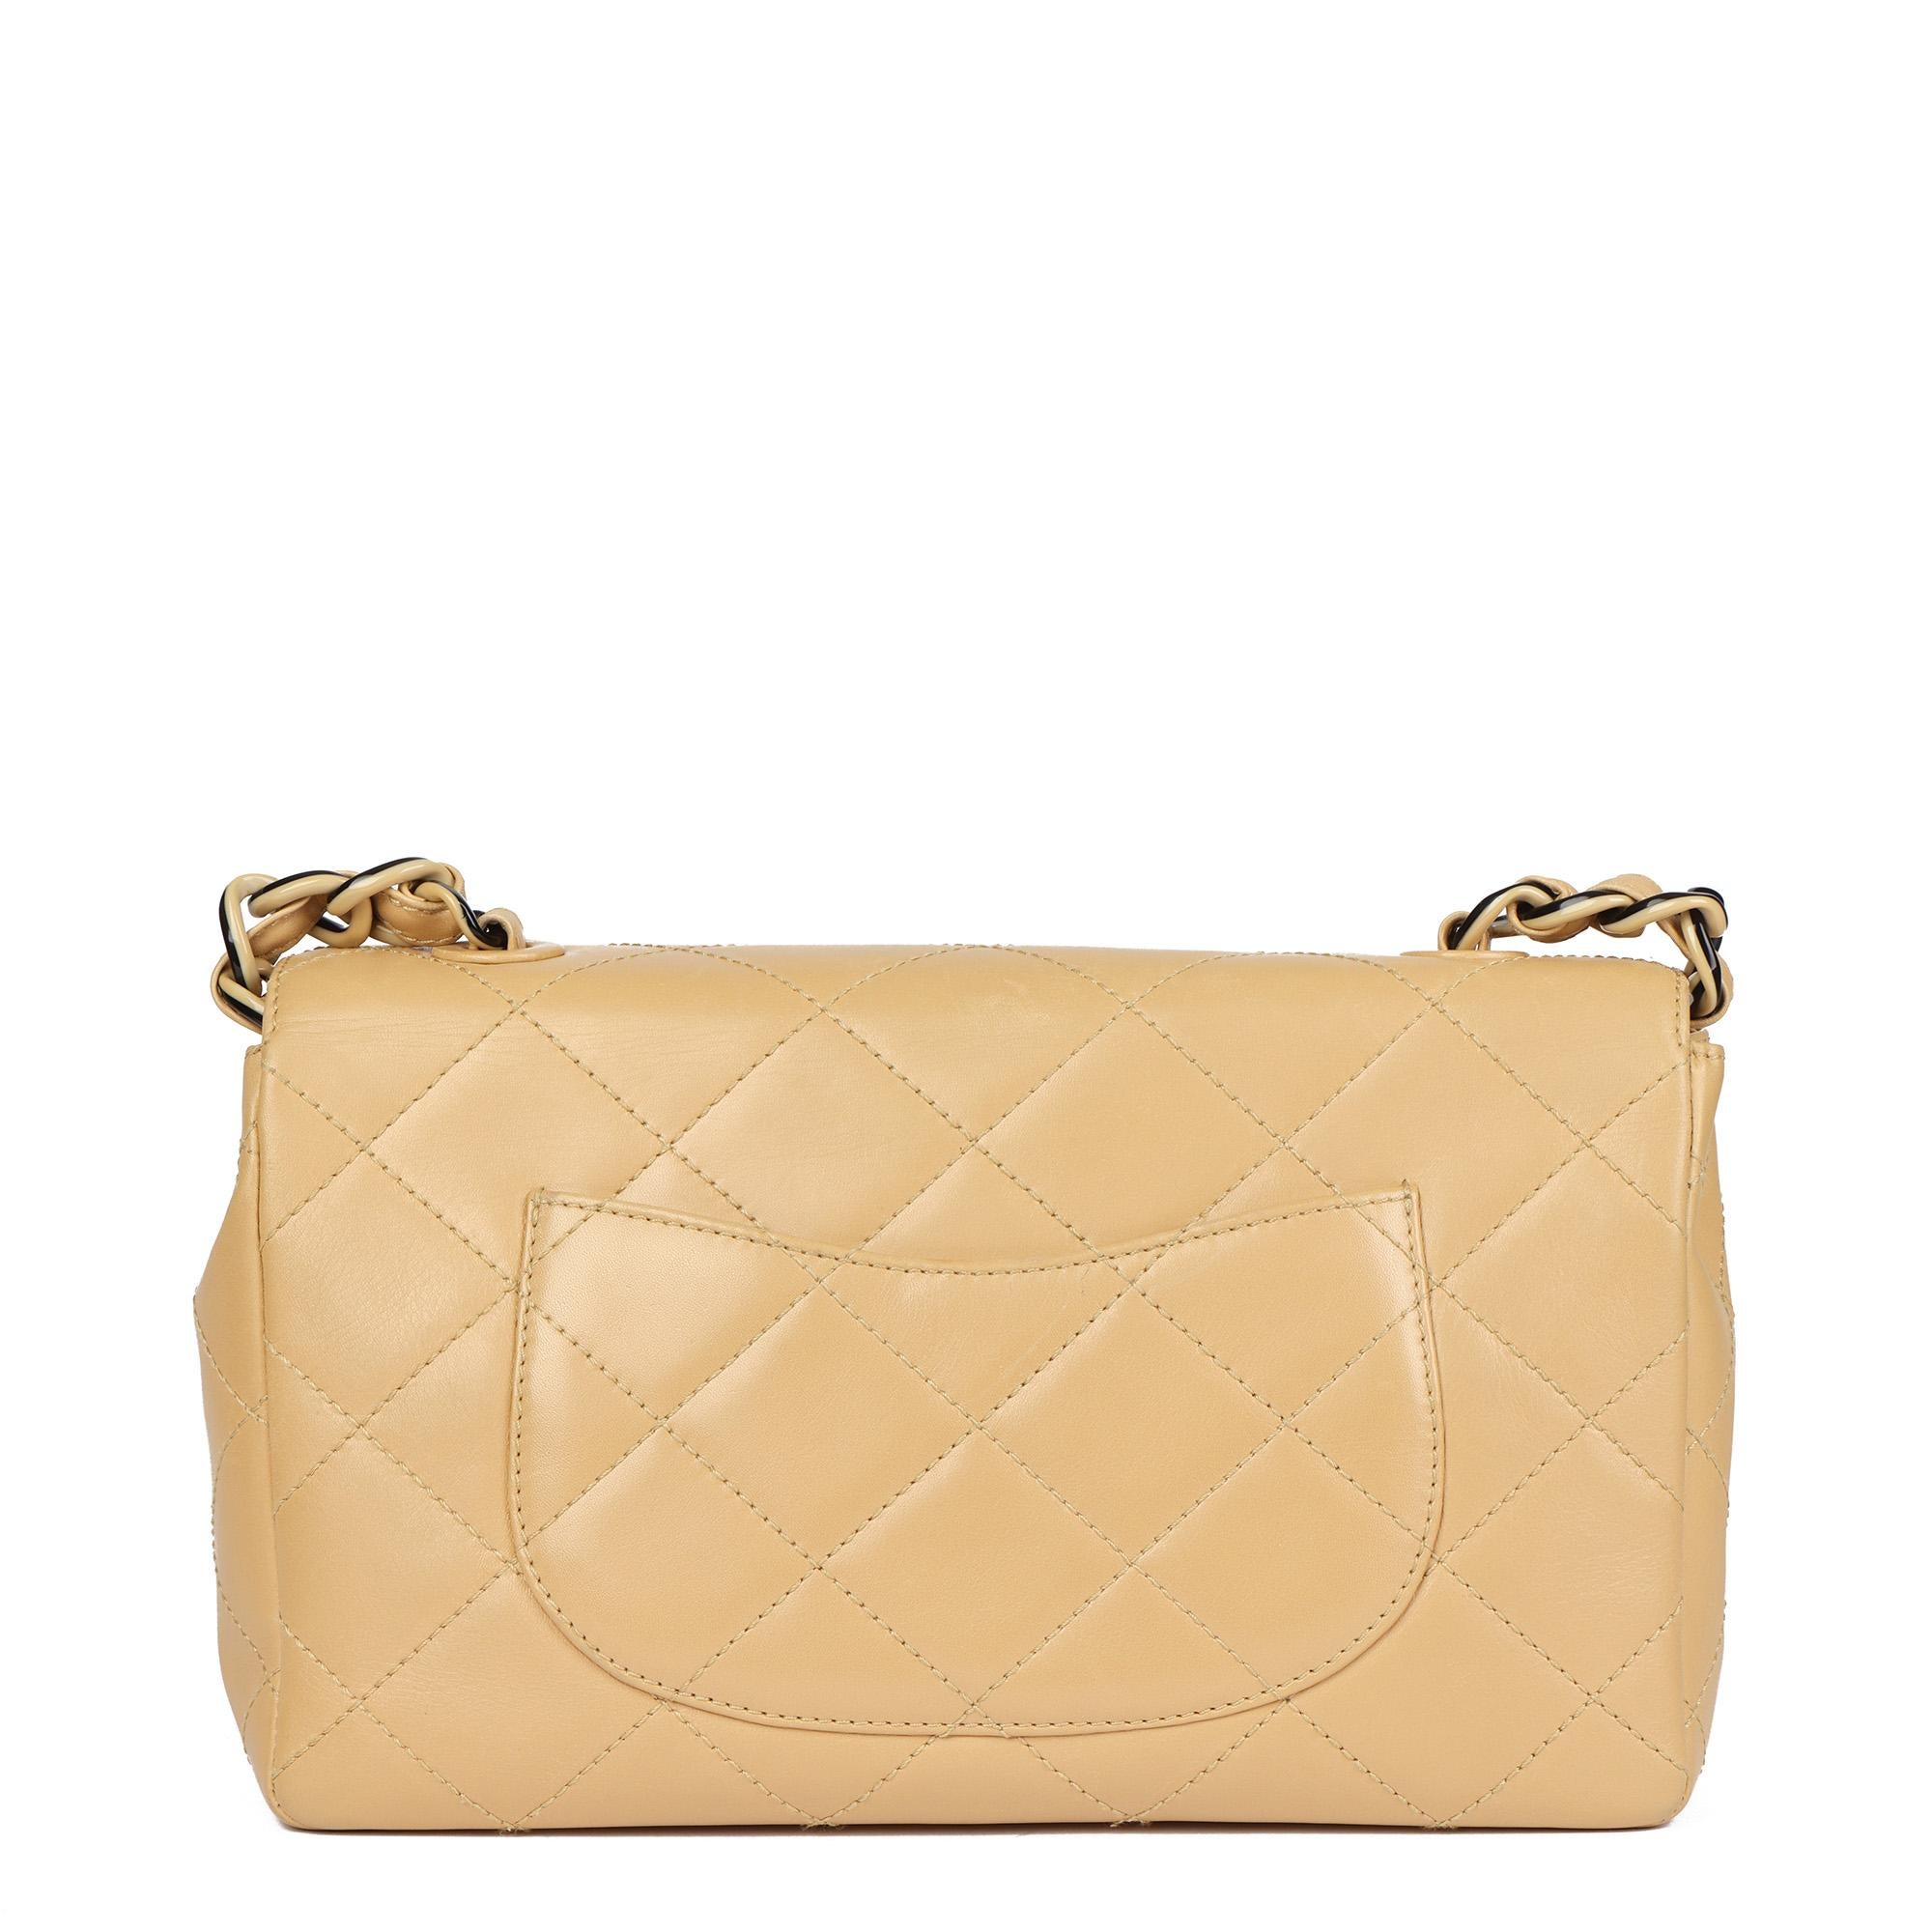 CHANEL Beige Quilted Lambskin Vintage Medium Classic Single Flap Bag 1